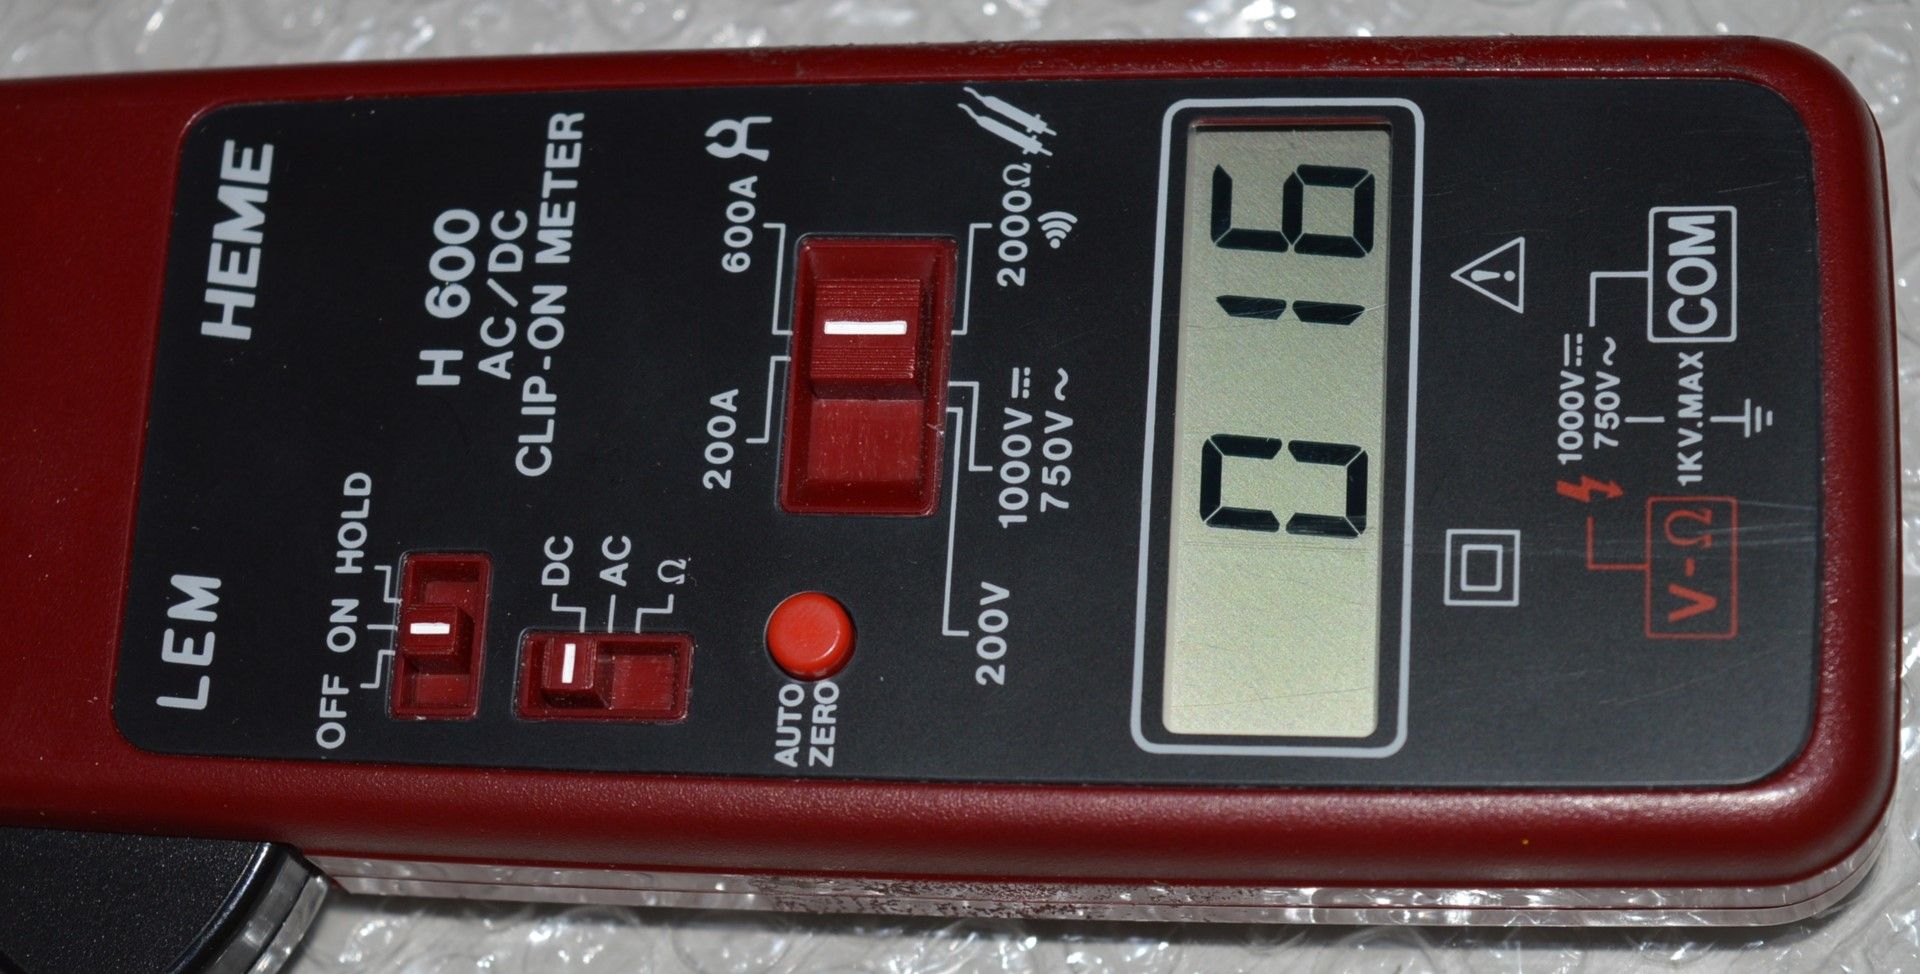 1 x LEM Heme H600 Clamp Meter - Includes Case, Test Cables and User Manual - CL300 - Ref PC314 - - Image 4 of 4